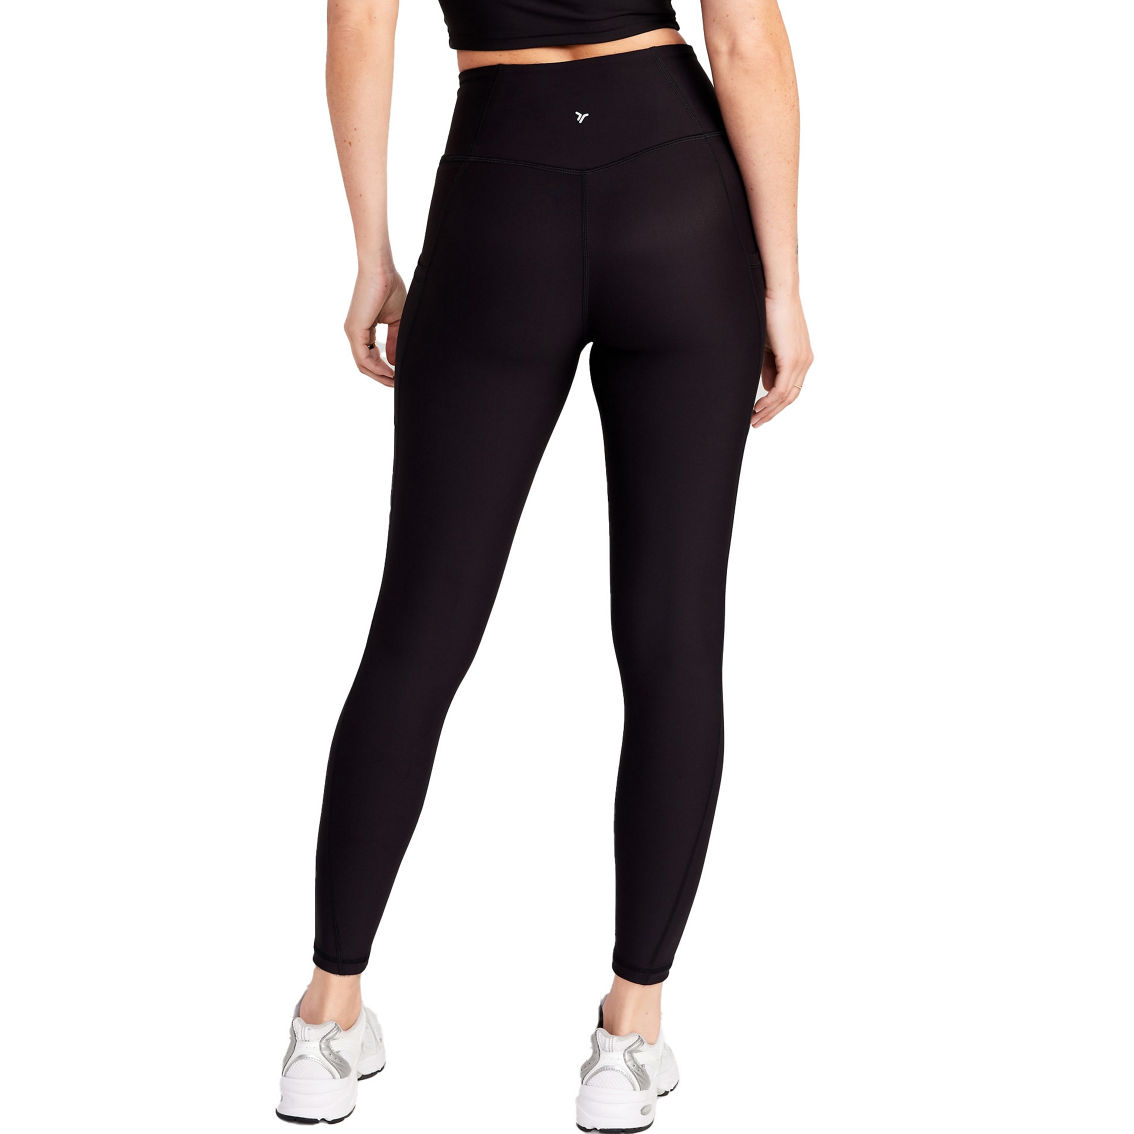 Old Navy PowerSoft 7/8 Leggings - Image 2 of 3